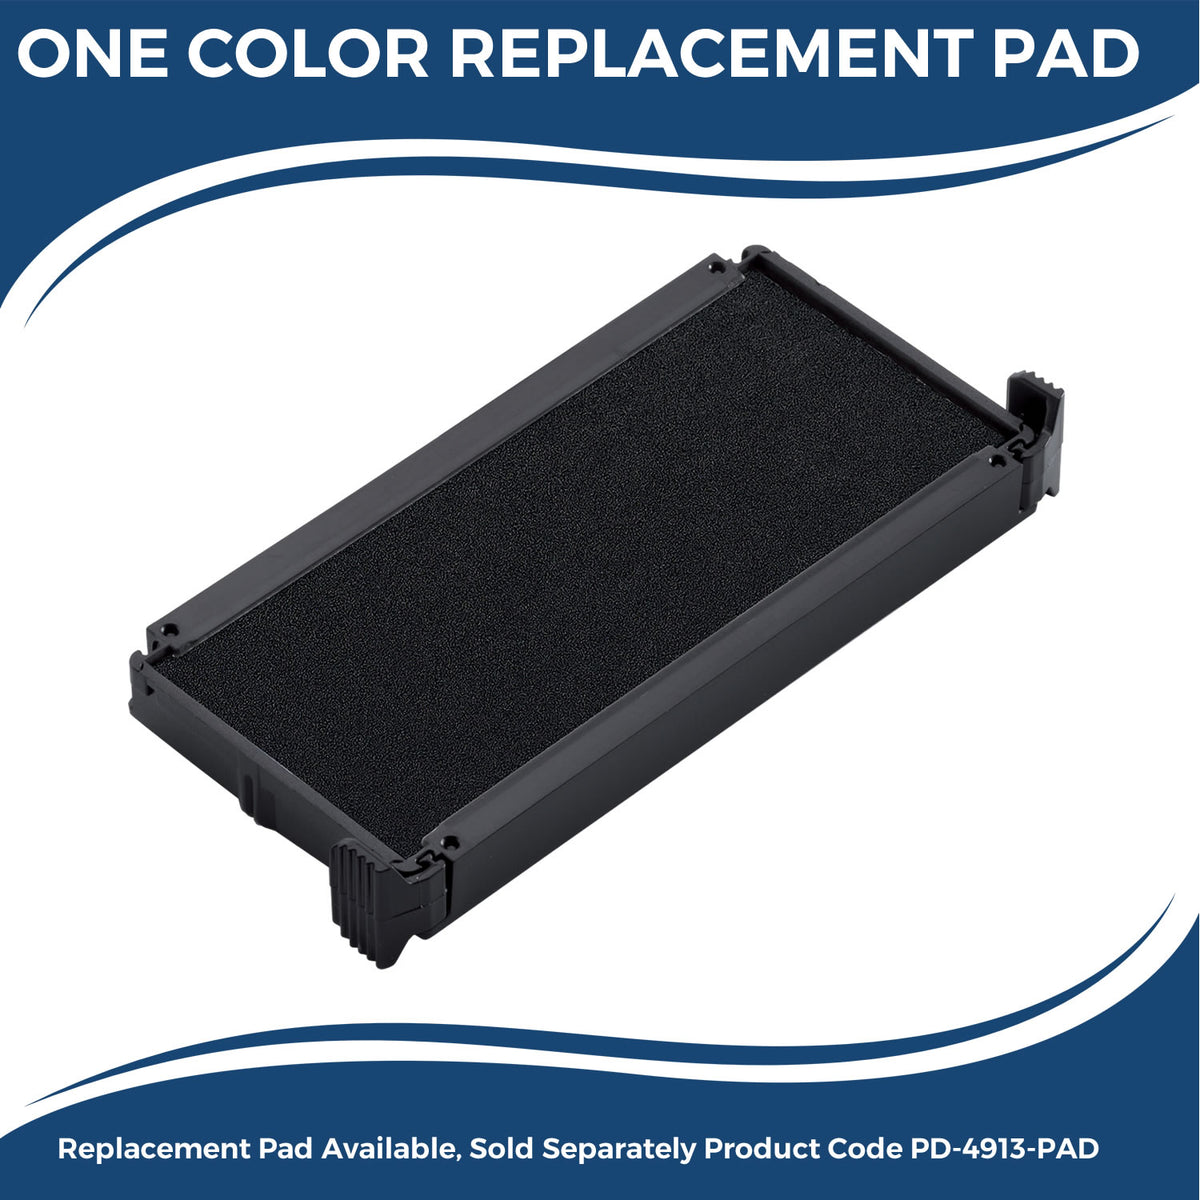 Large Self Inking Validated Stamp 4582S Large Replacment Pad